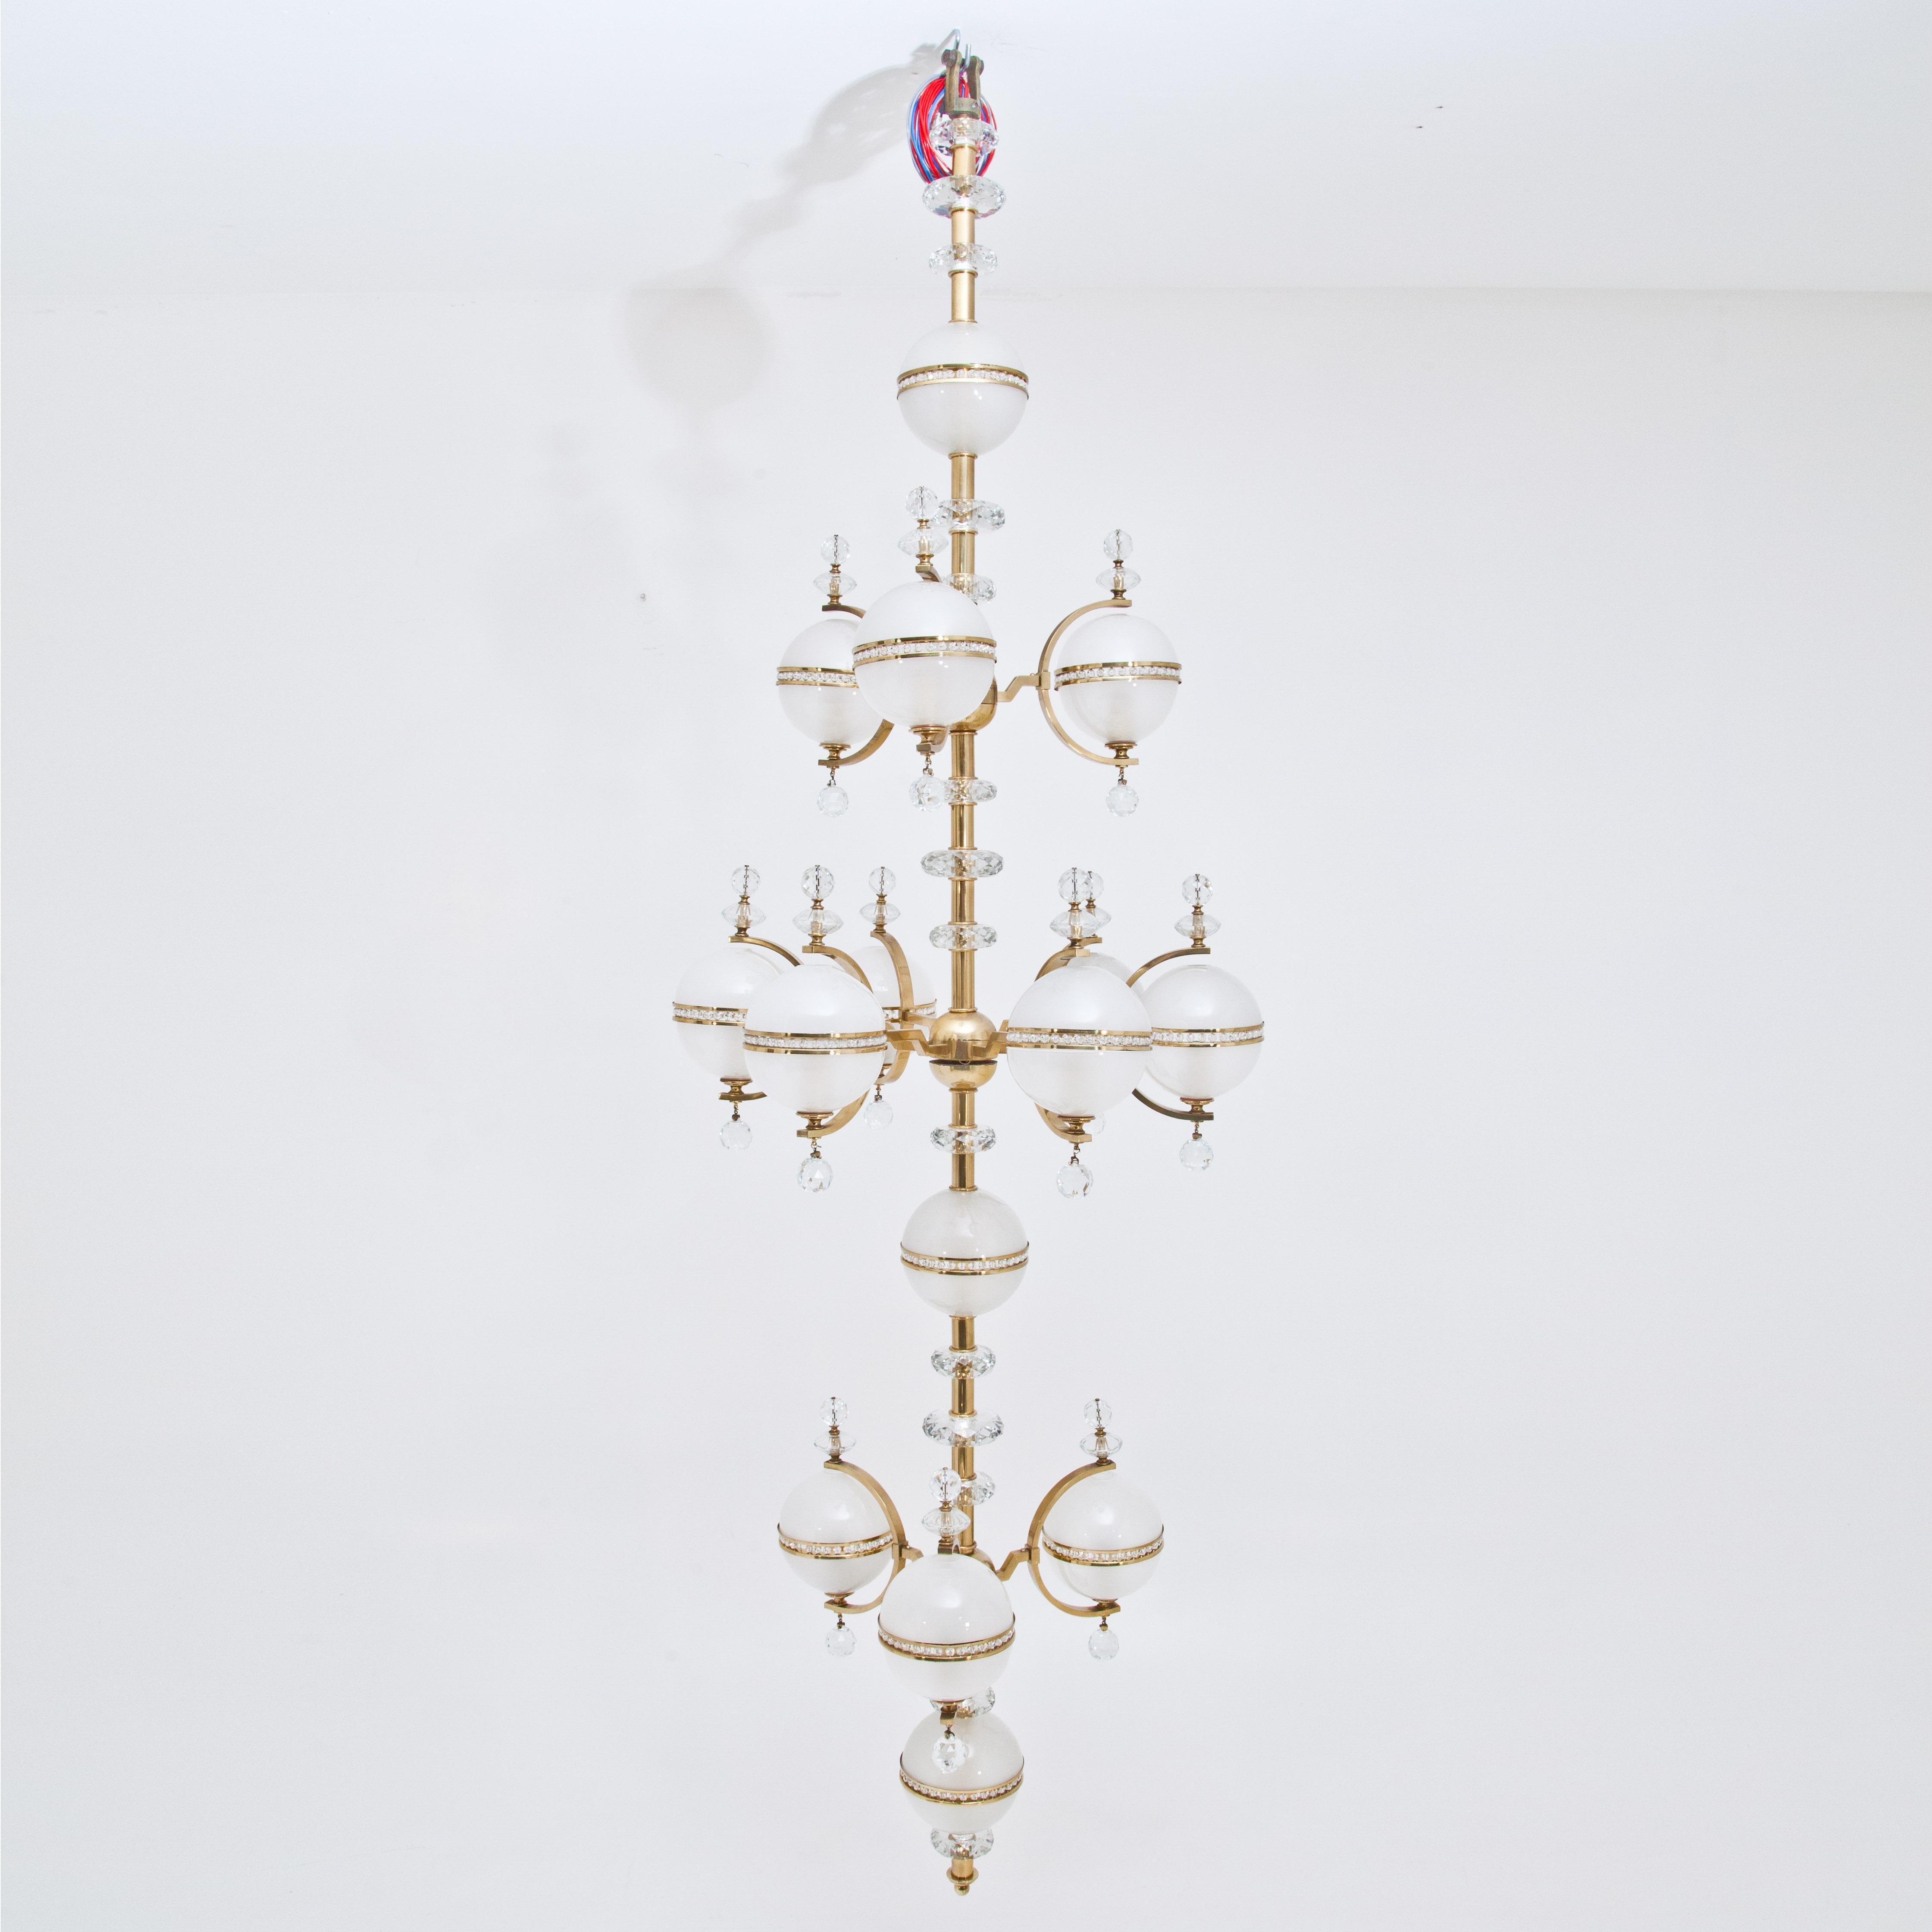 Large chandelier with cut crystal glass elements and a total of 15 spherical glass bodies of opal glass grouped around the central brass rod. Stamped Lobmeyr.